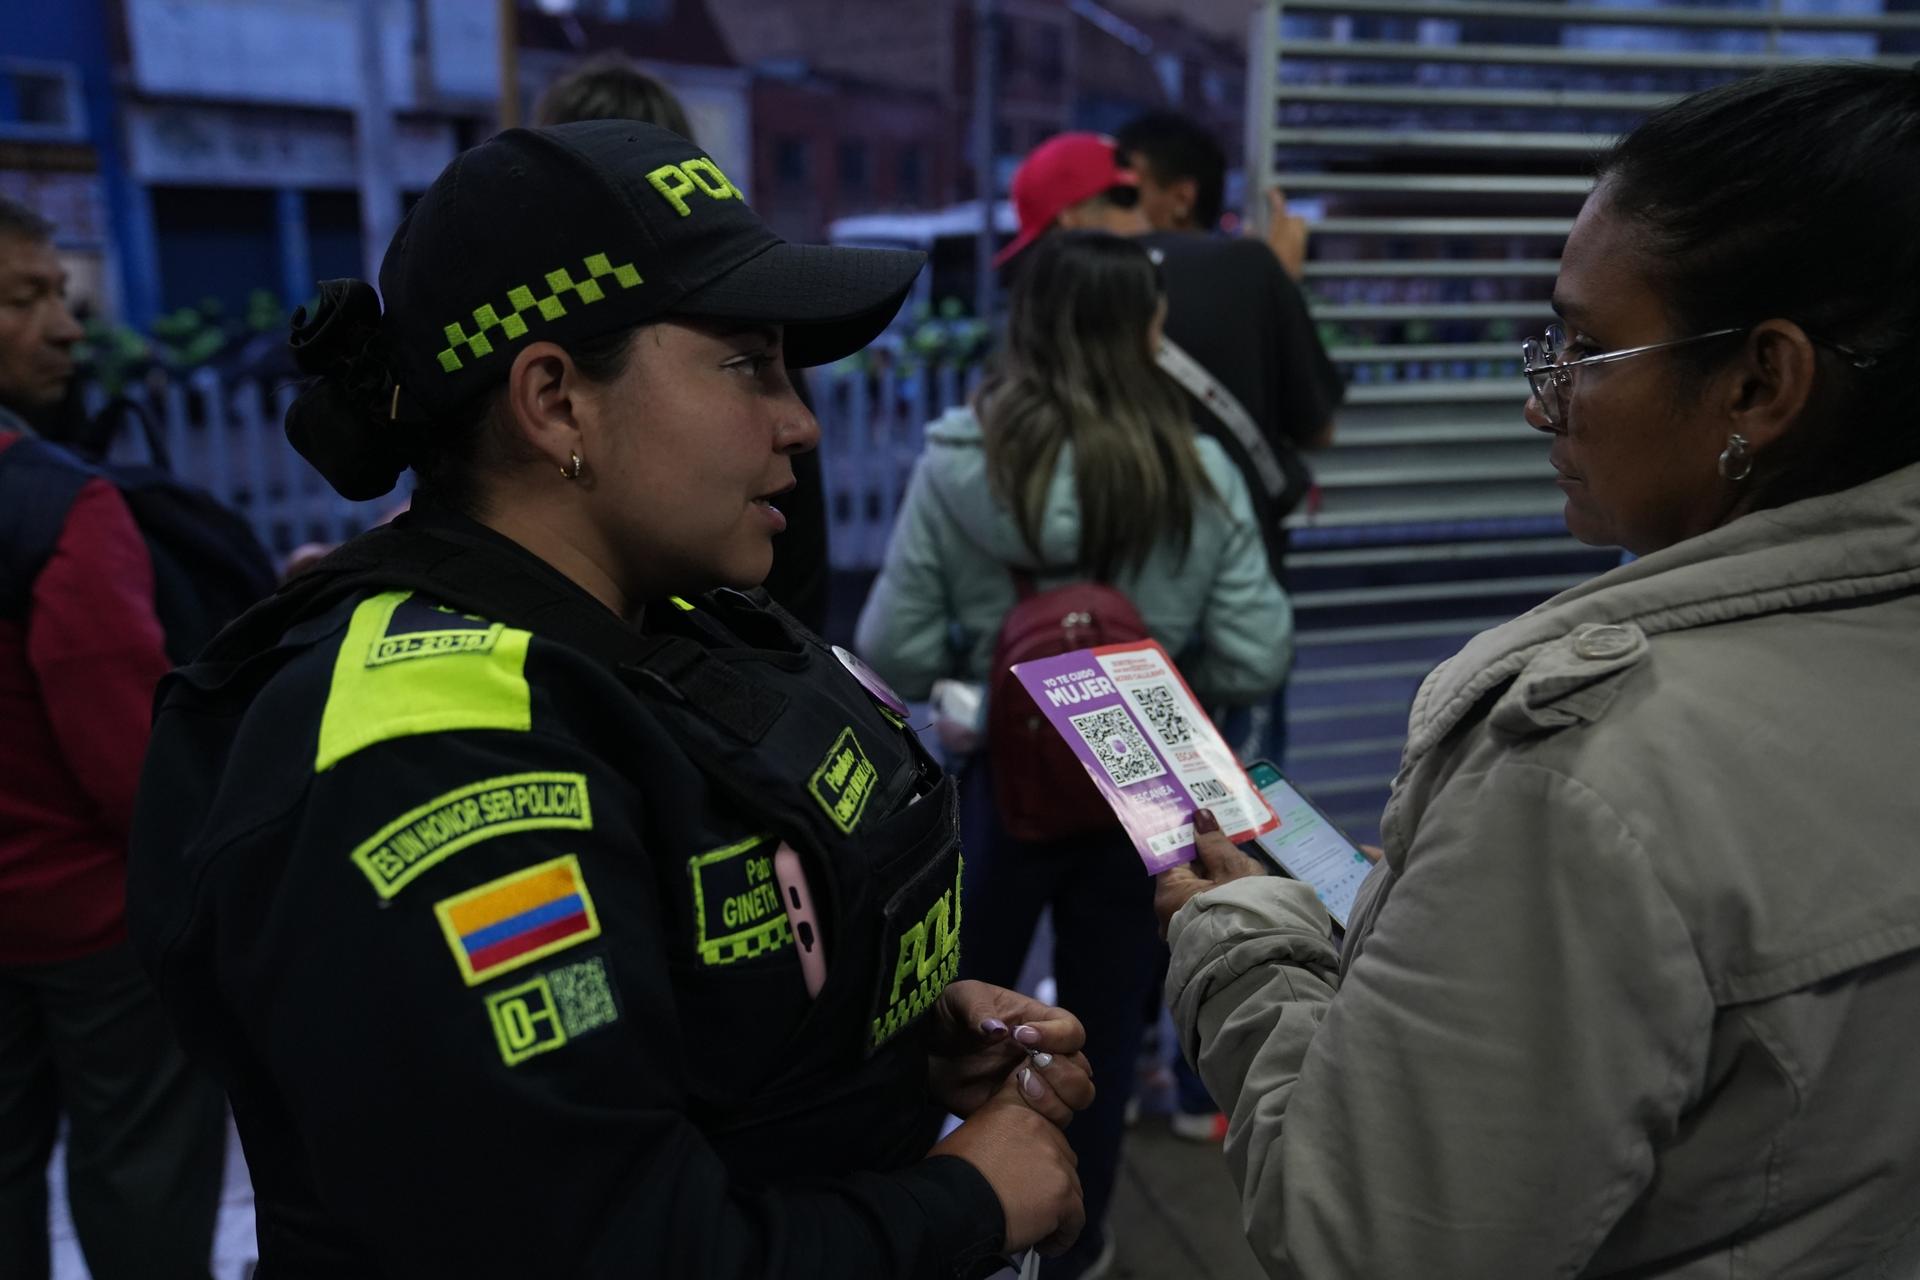 The Purple Patrol was created to tackle gender-based violence in Colombia's capital.